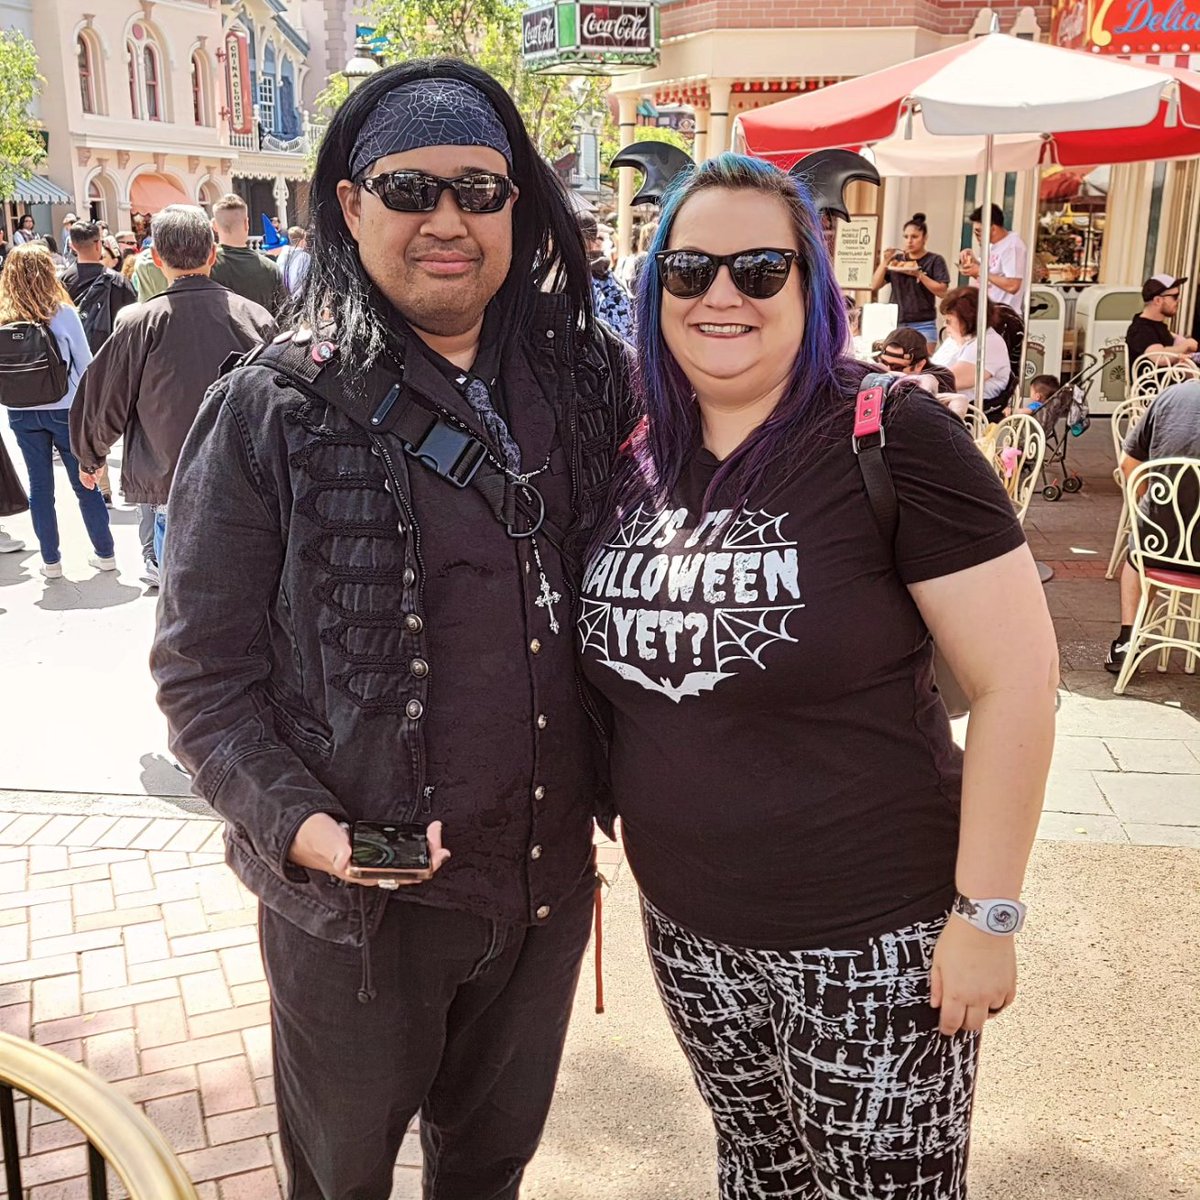 Nothing like connecting with a friend you've known for 20 years! Allannnnnnn!!! 🎃 @batsday #25th #batsday #DisneyGoth